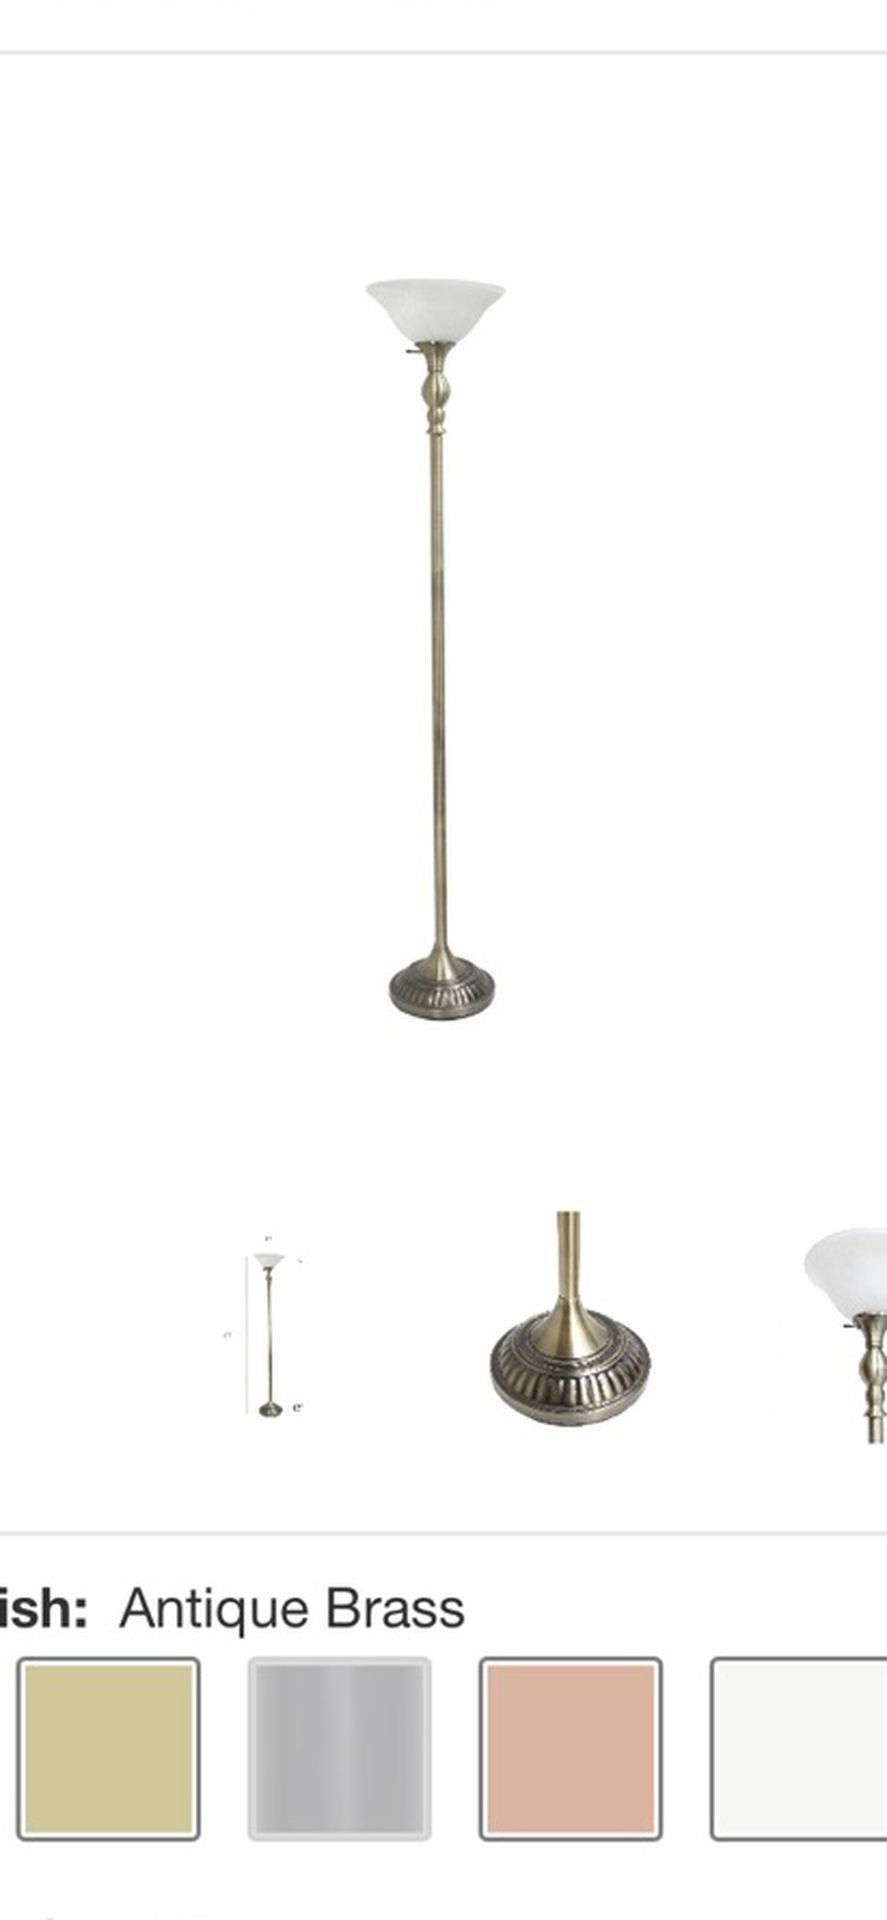 Elegant Designs 71 in. 1-Light Antique Brass Torchiere Floor Lamp with Marbleized White Glass Shade